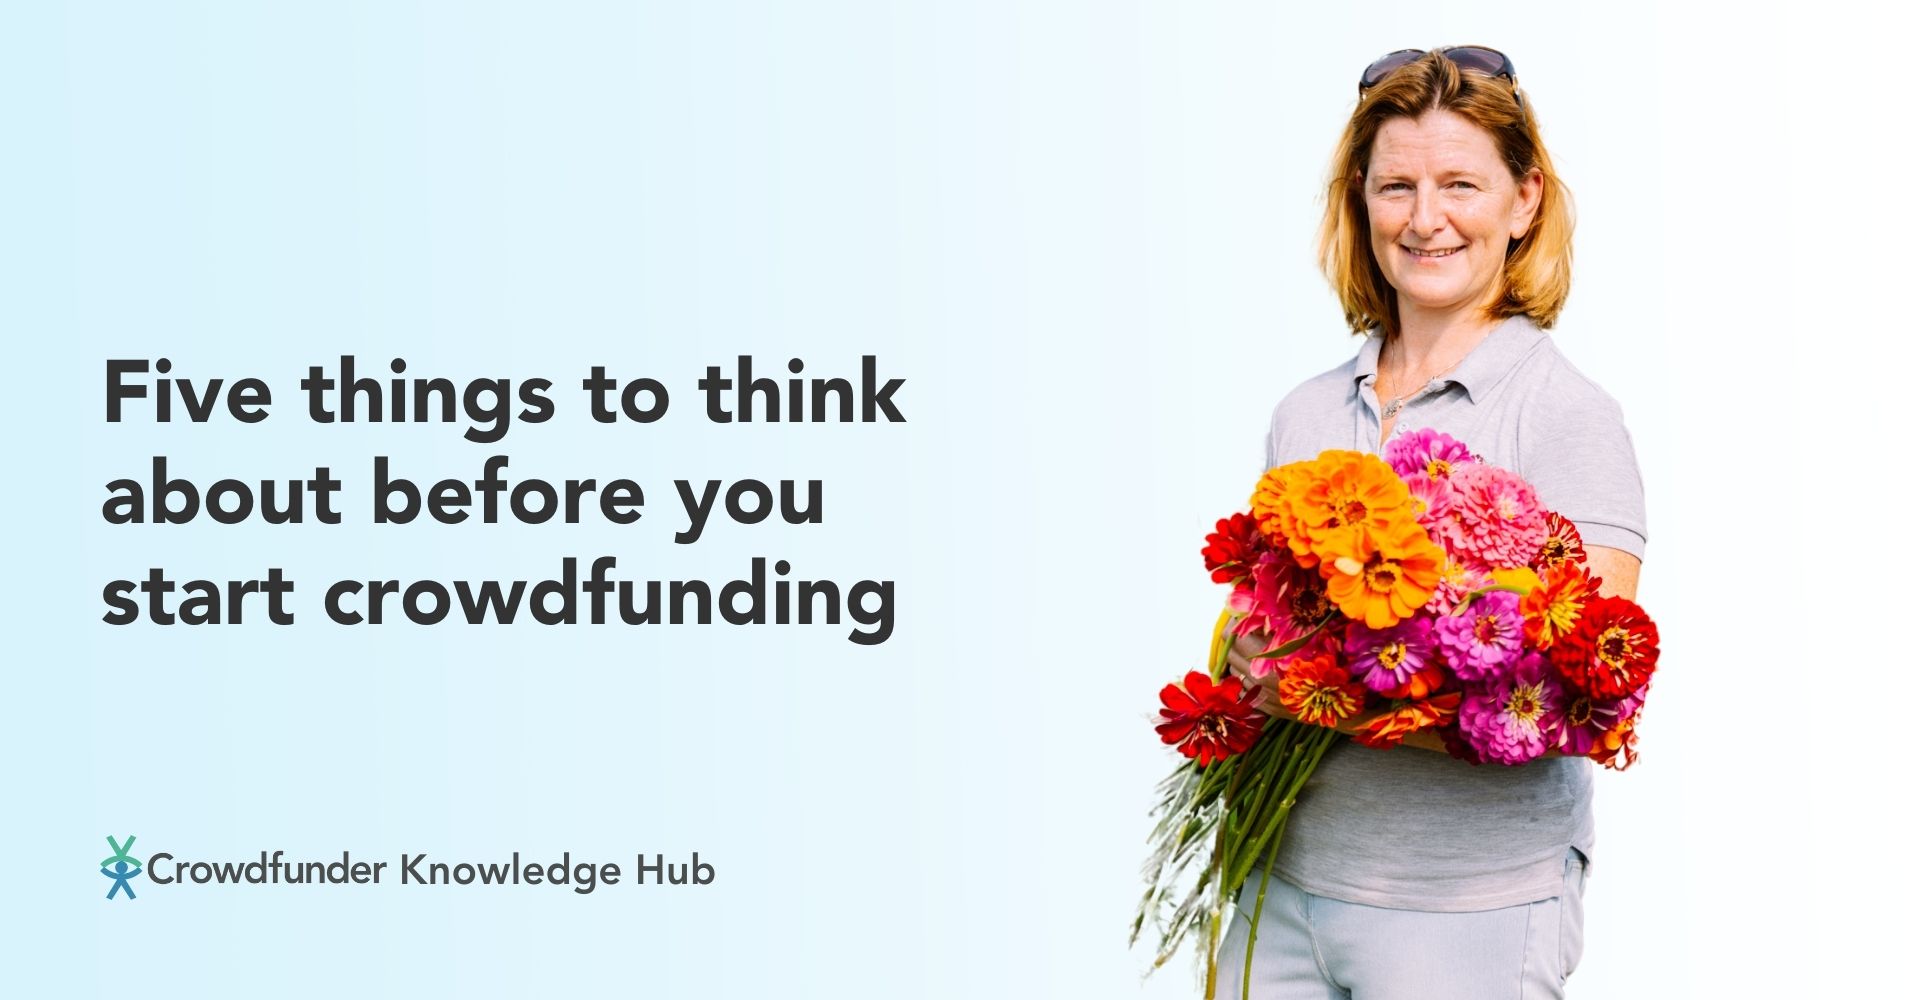 Five things to think about before you start crowdfunding